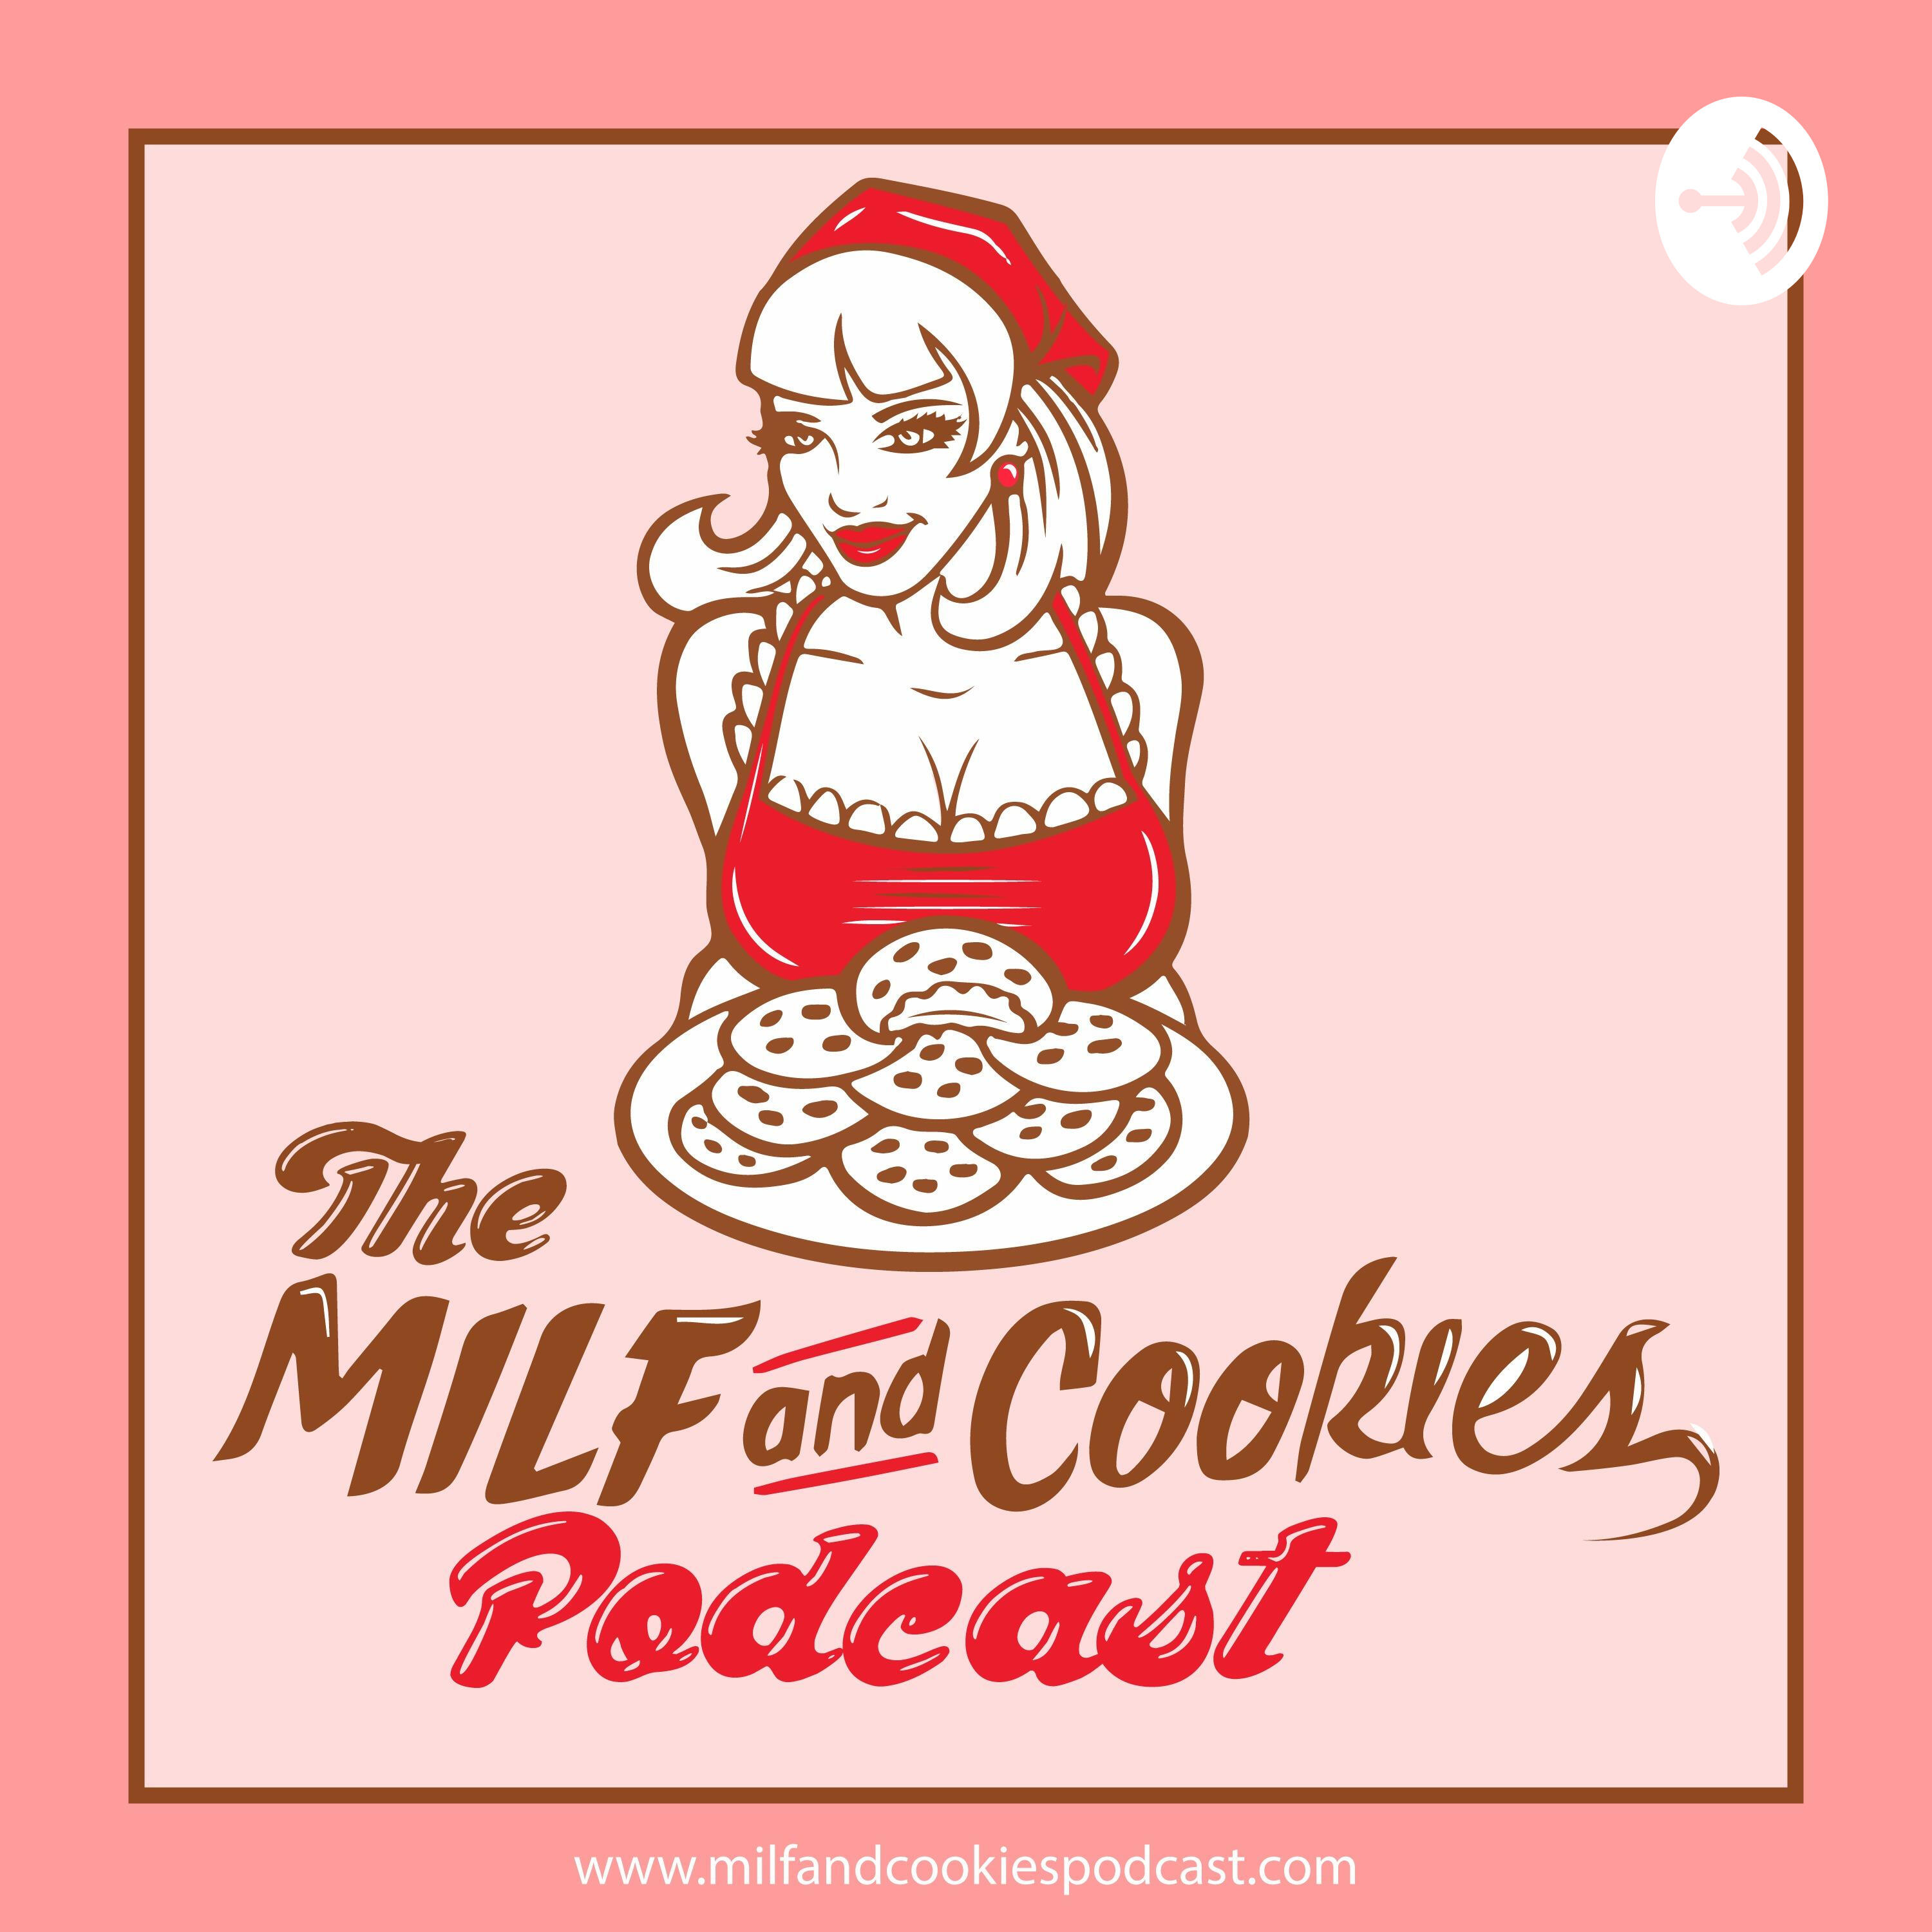 Cookies and milf